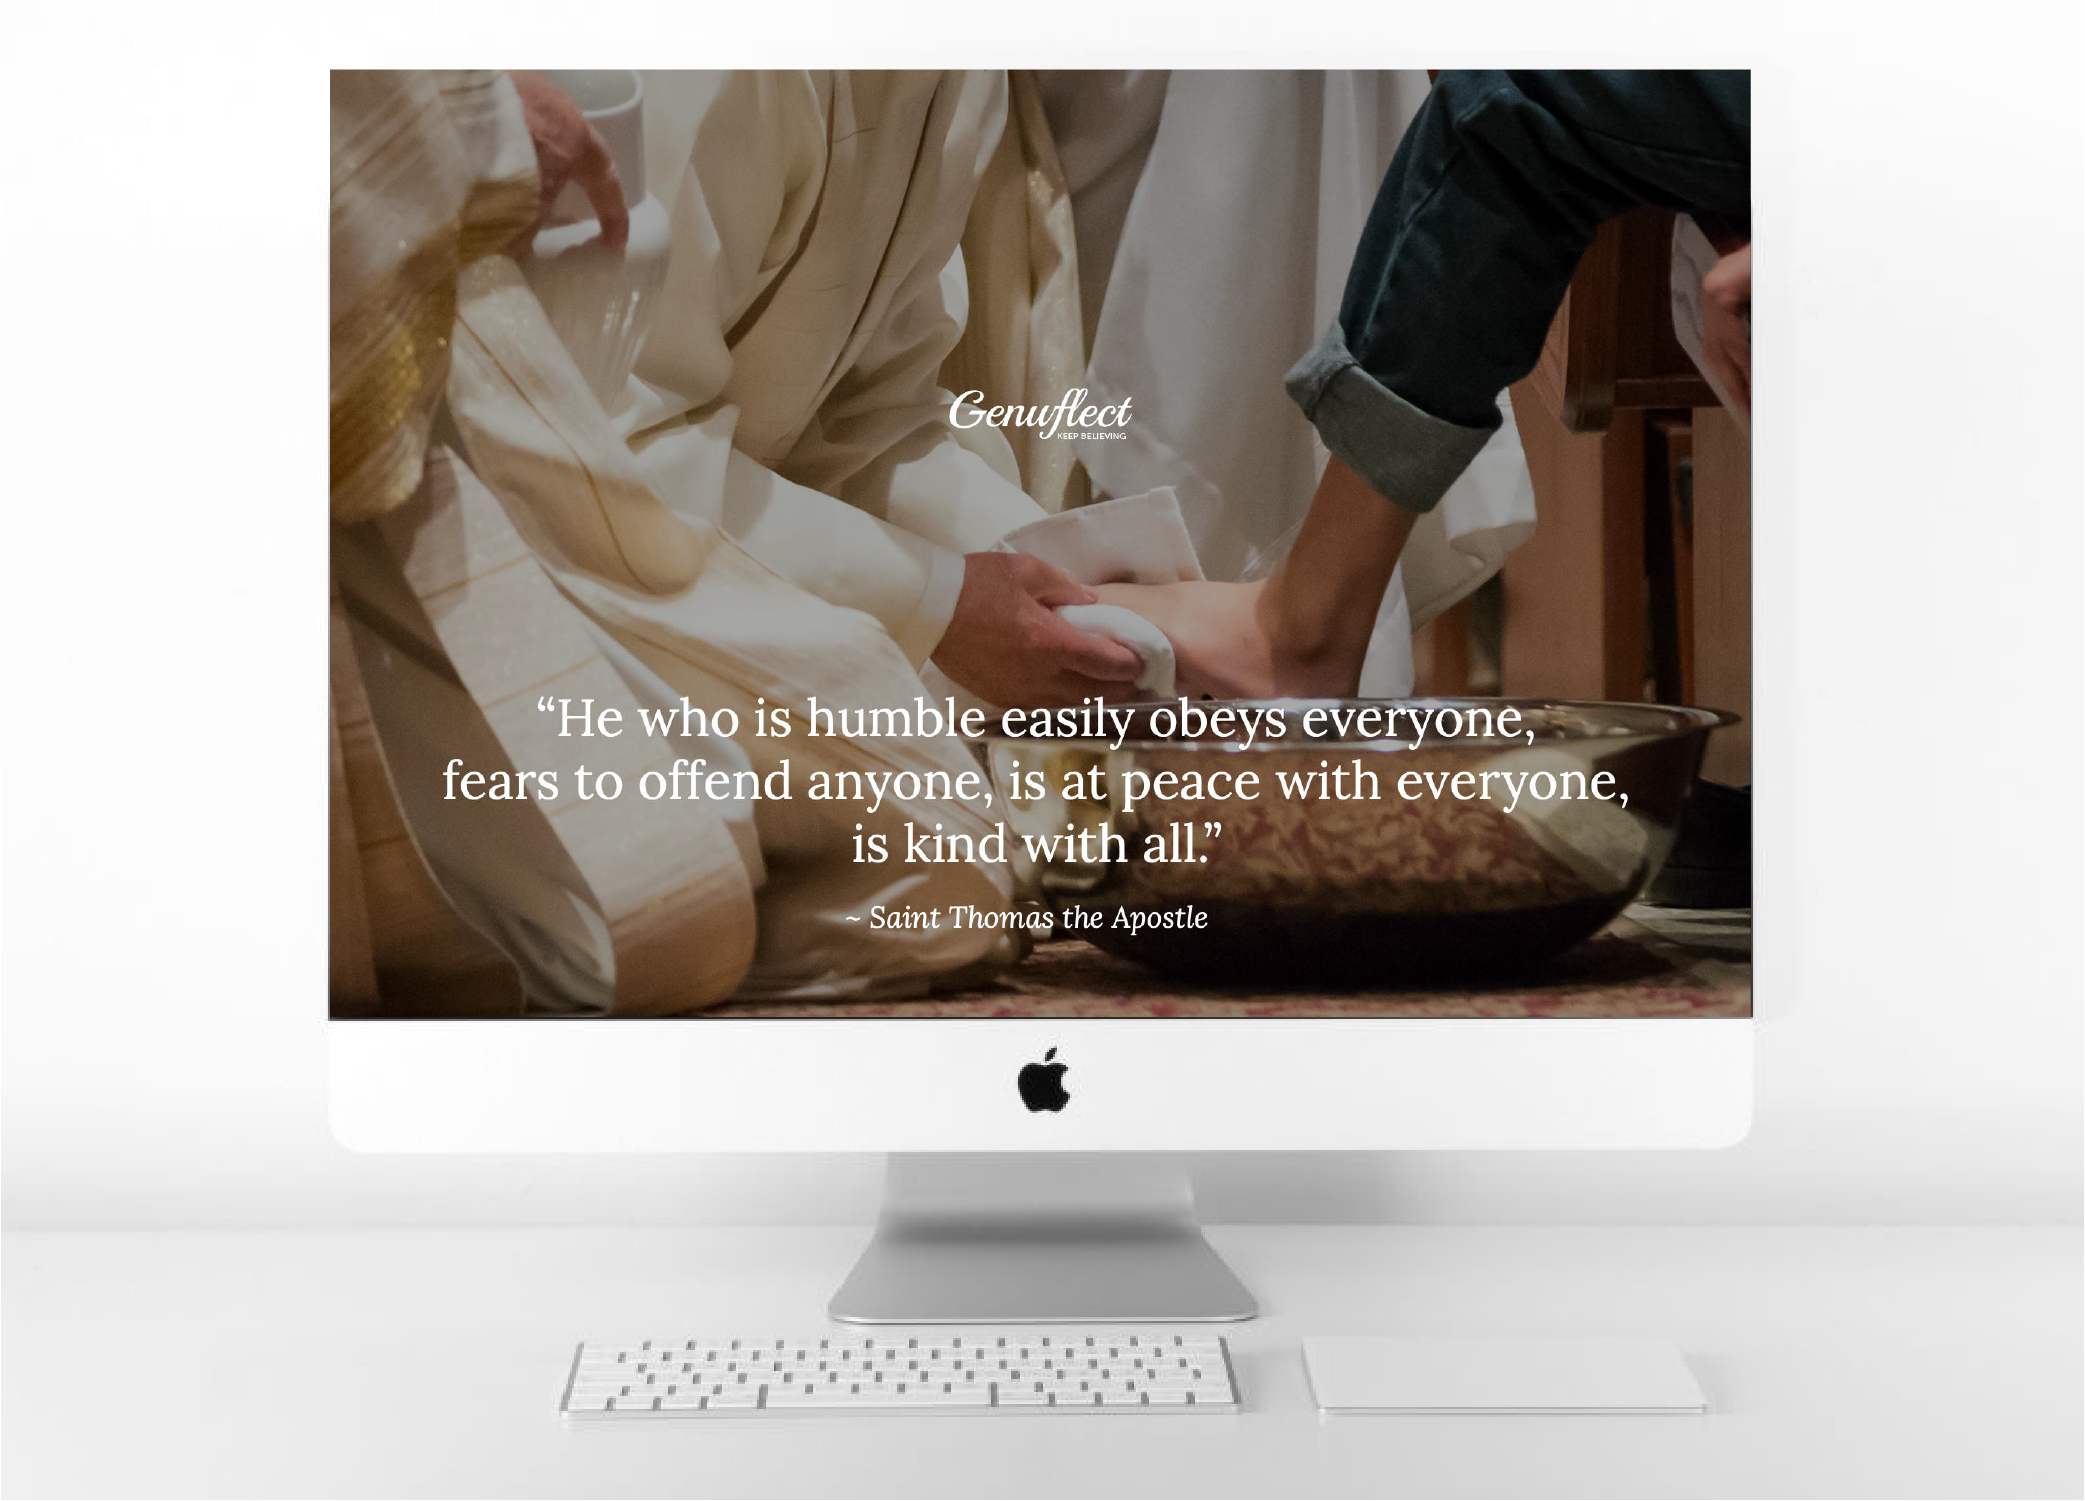 Genuflect.net St Thomas quote on image of priest washing anothers feet as desktop image of a computer